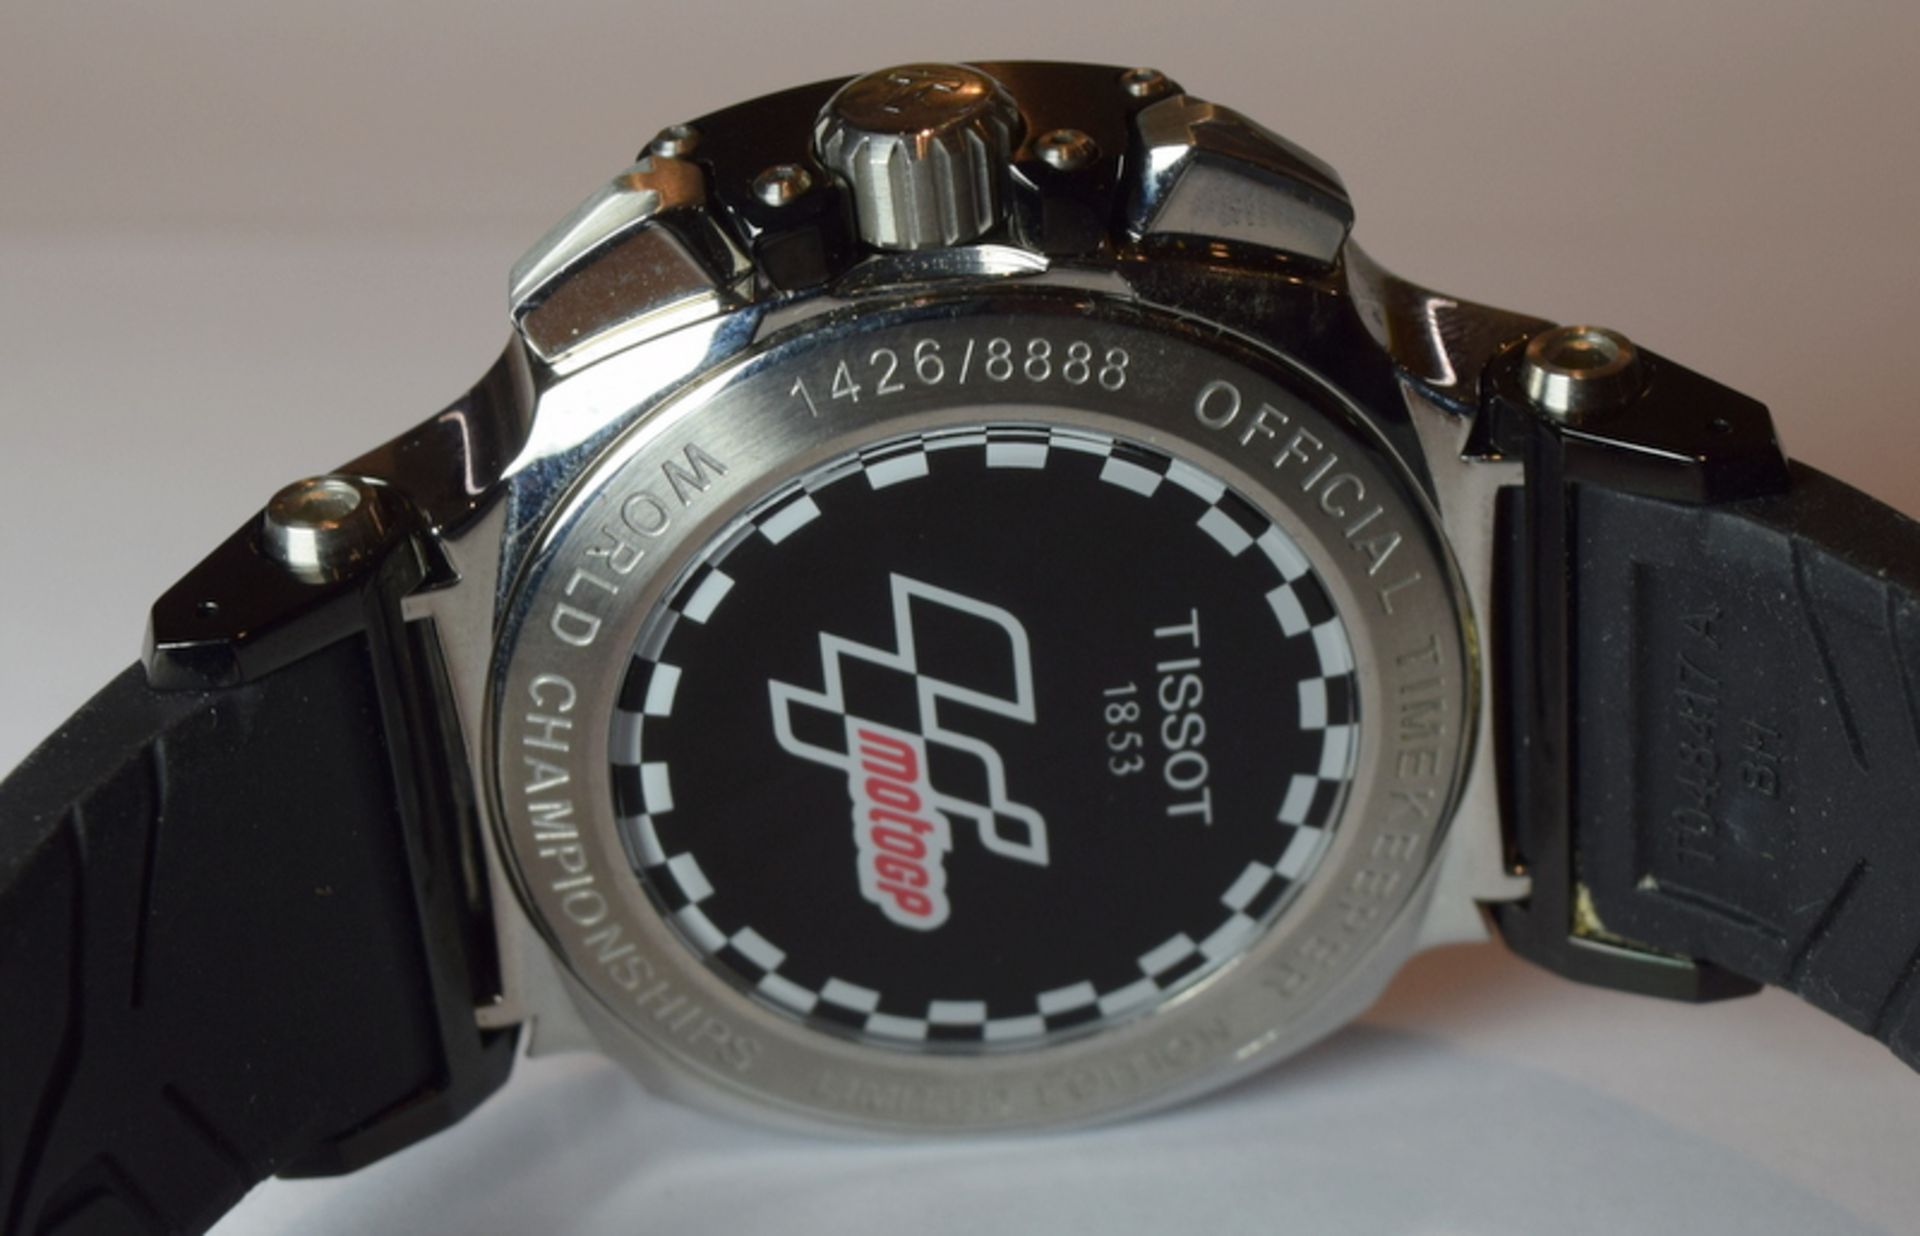 Tissot Limited Edition T-Race MOTO GP Watch - Image 6 of 7